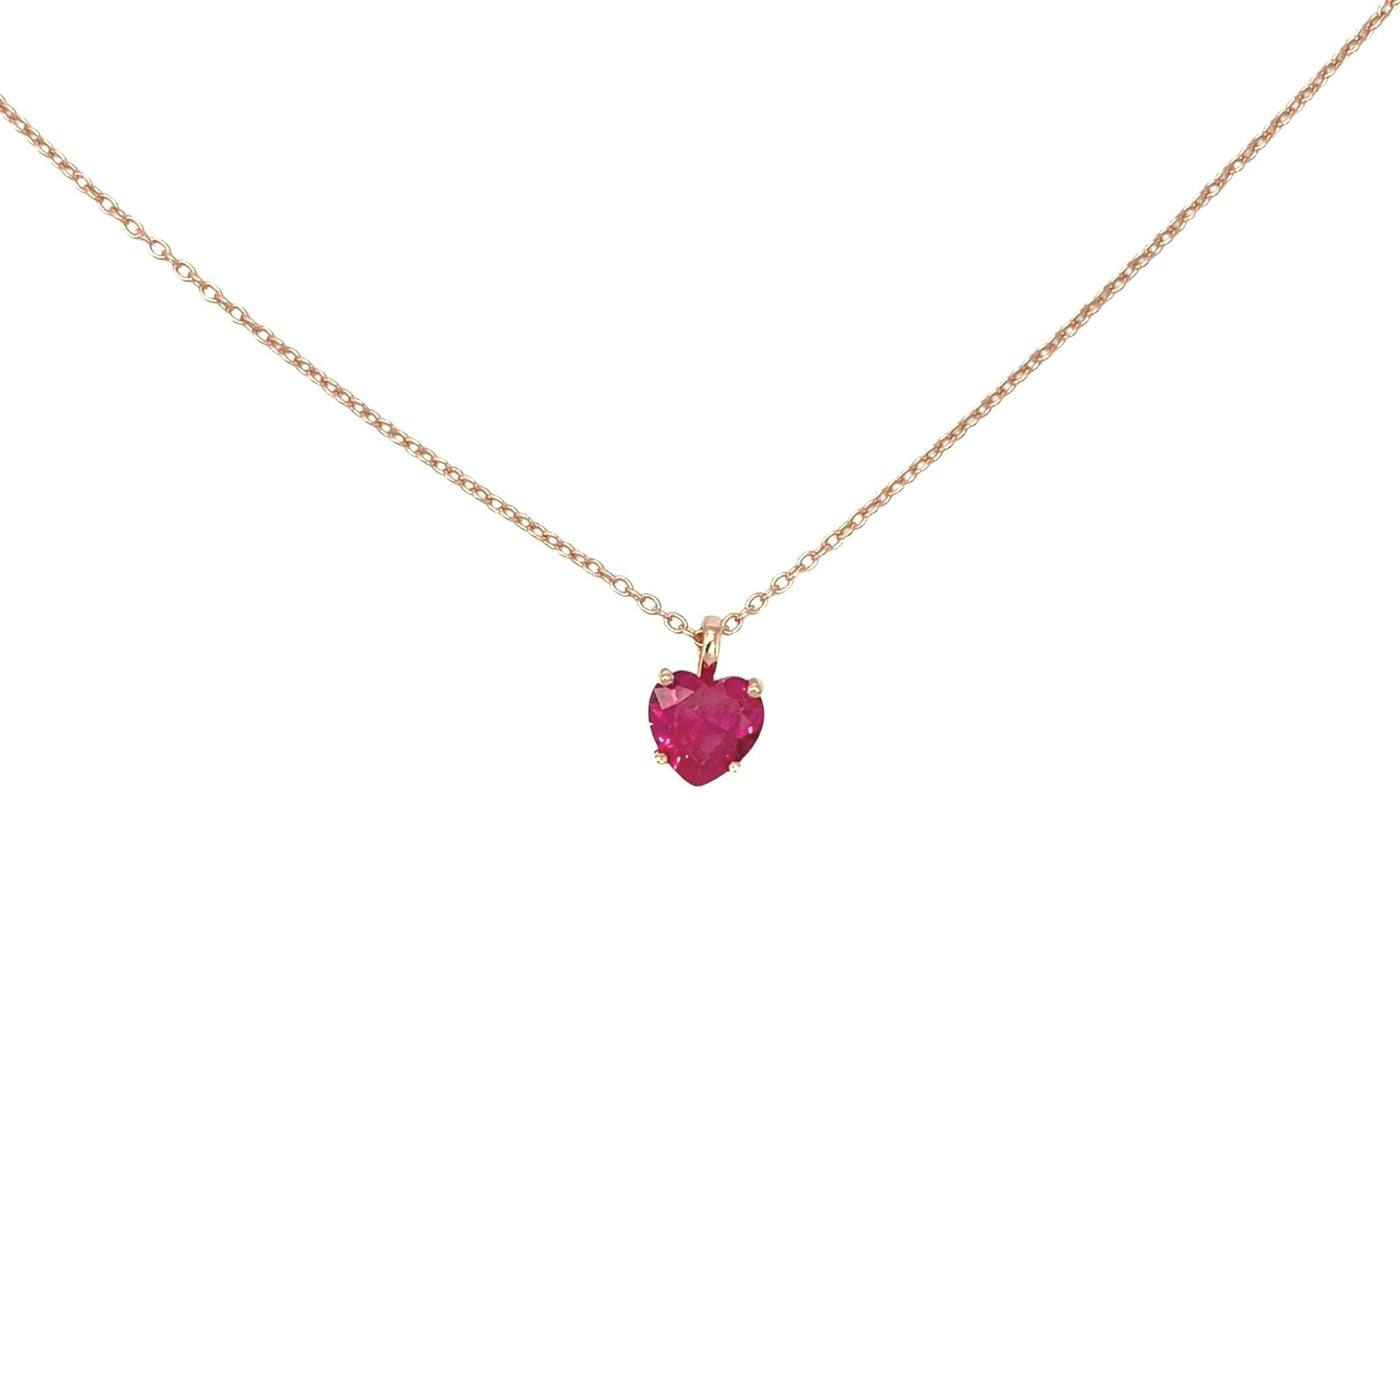 Silver necklace with heart charm - rose - 7 mm